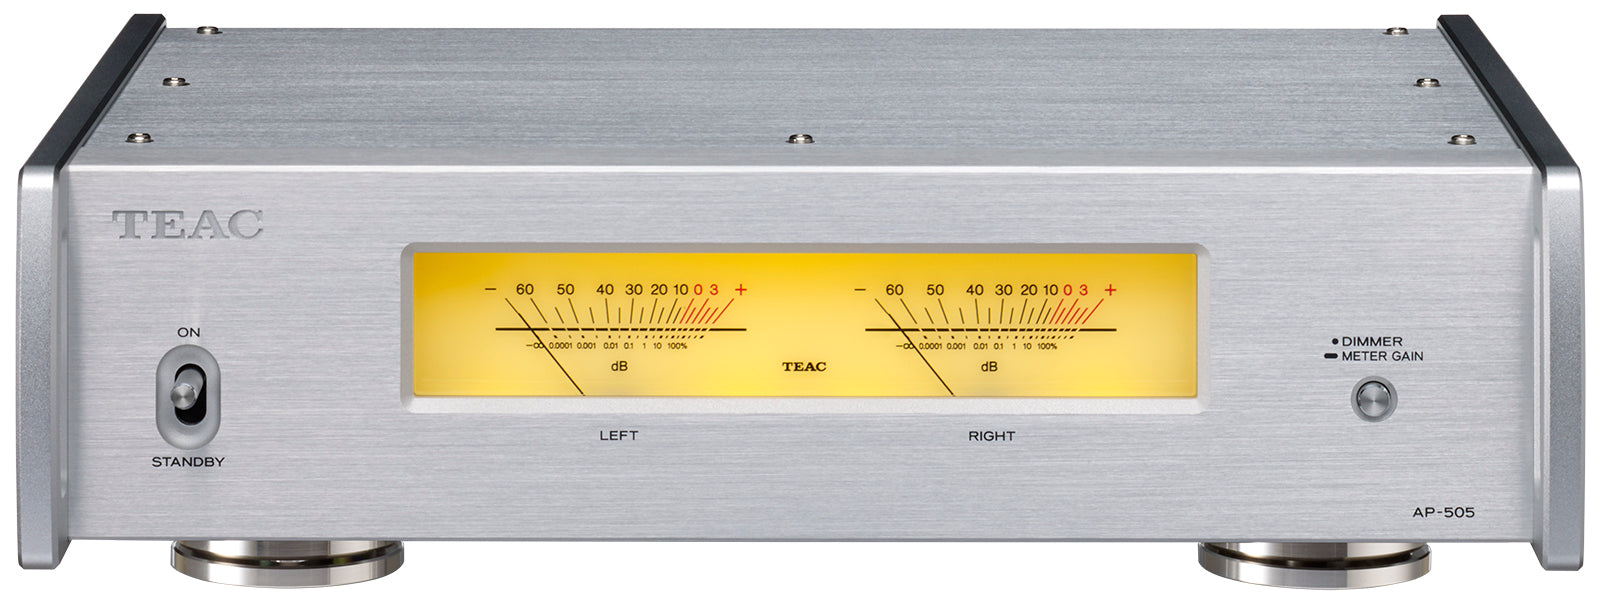 AP-505 Stereo Power Amplifier-sale price ends June 16th – TEAC USA